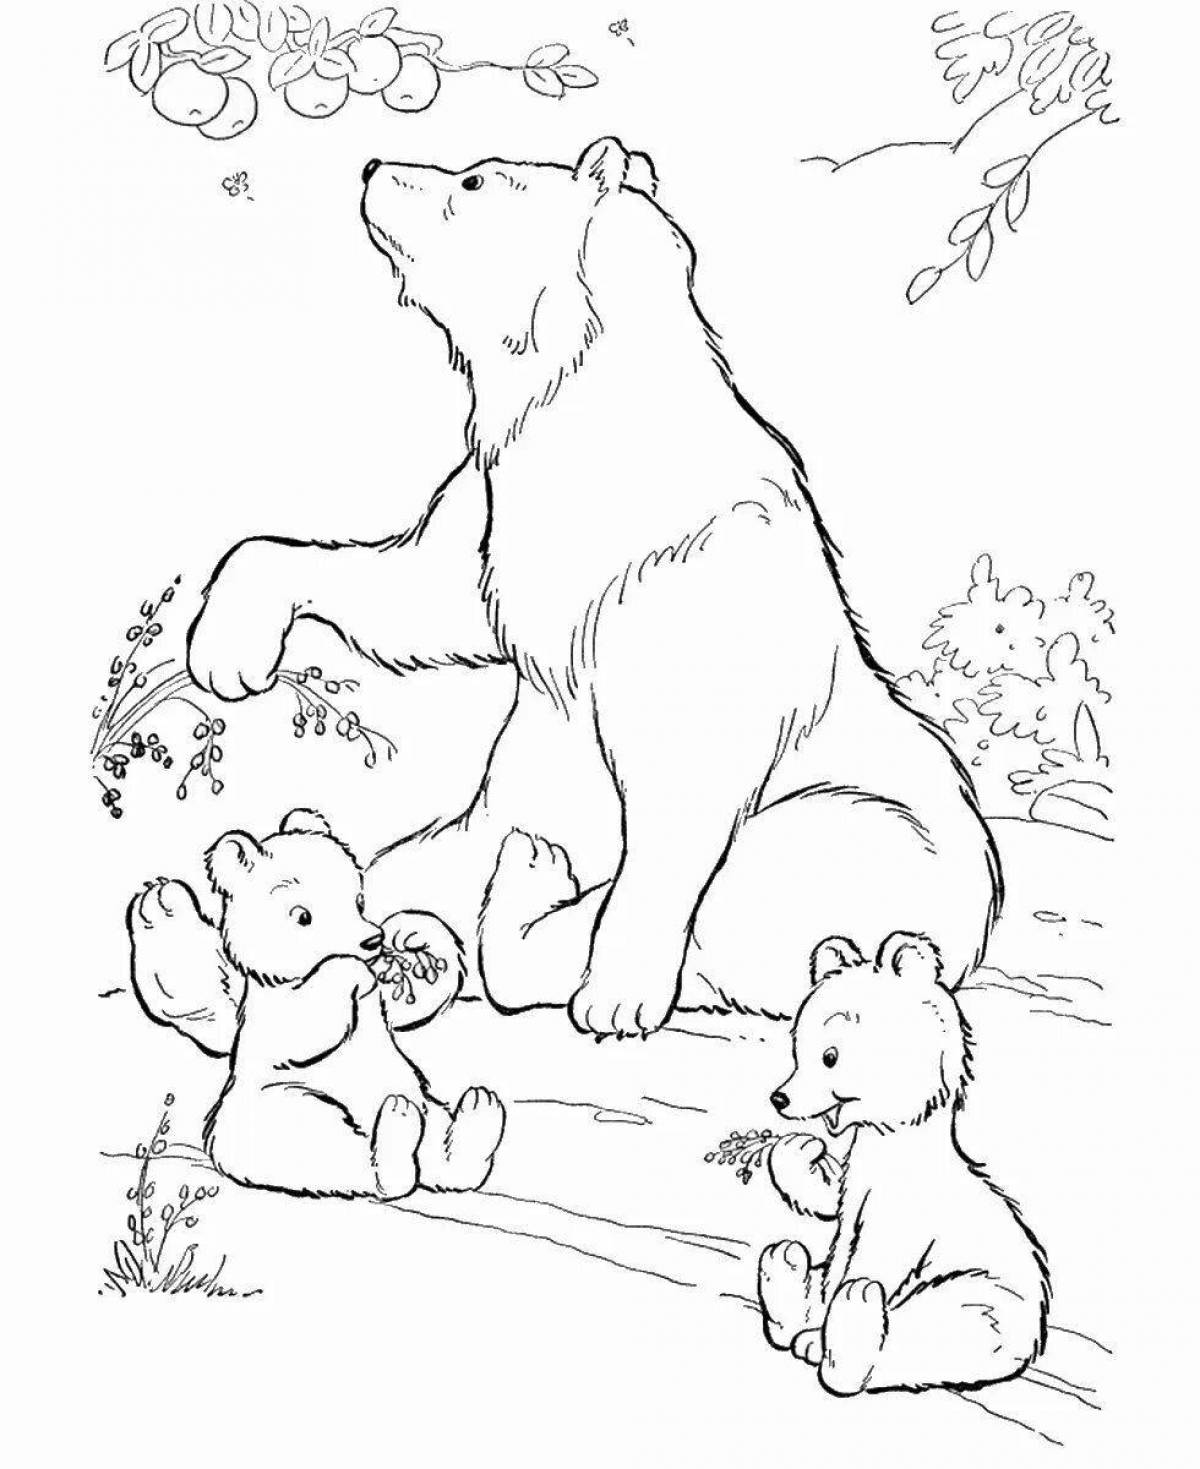 Coloring book smiling teddy bear and teddy bear